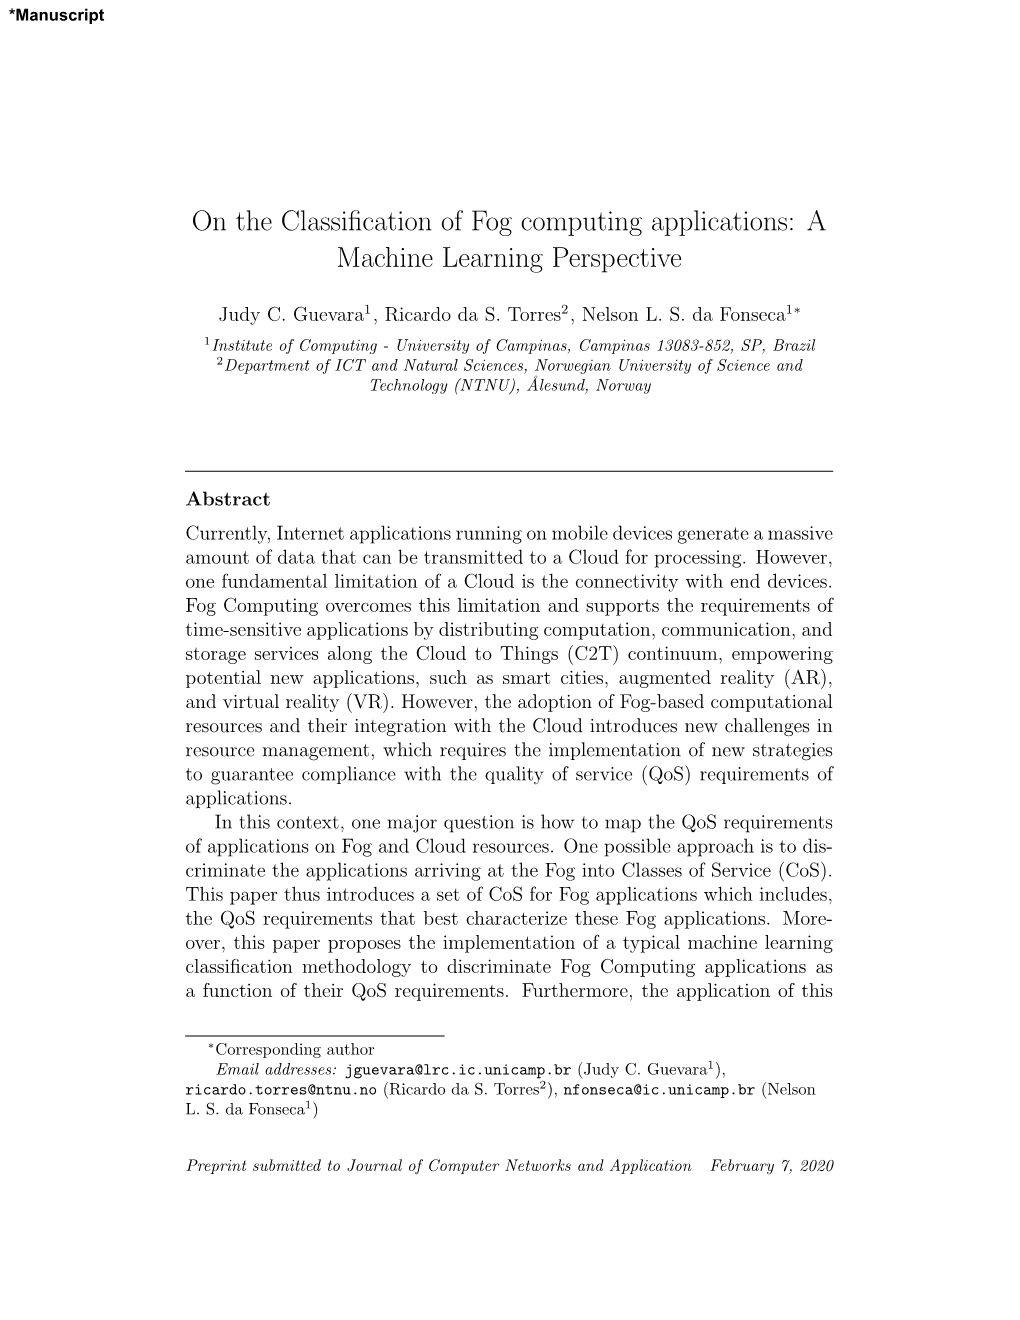 On the Classification of Fog Computing Applications: a Machine Learning Perspective”